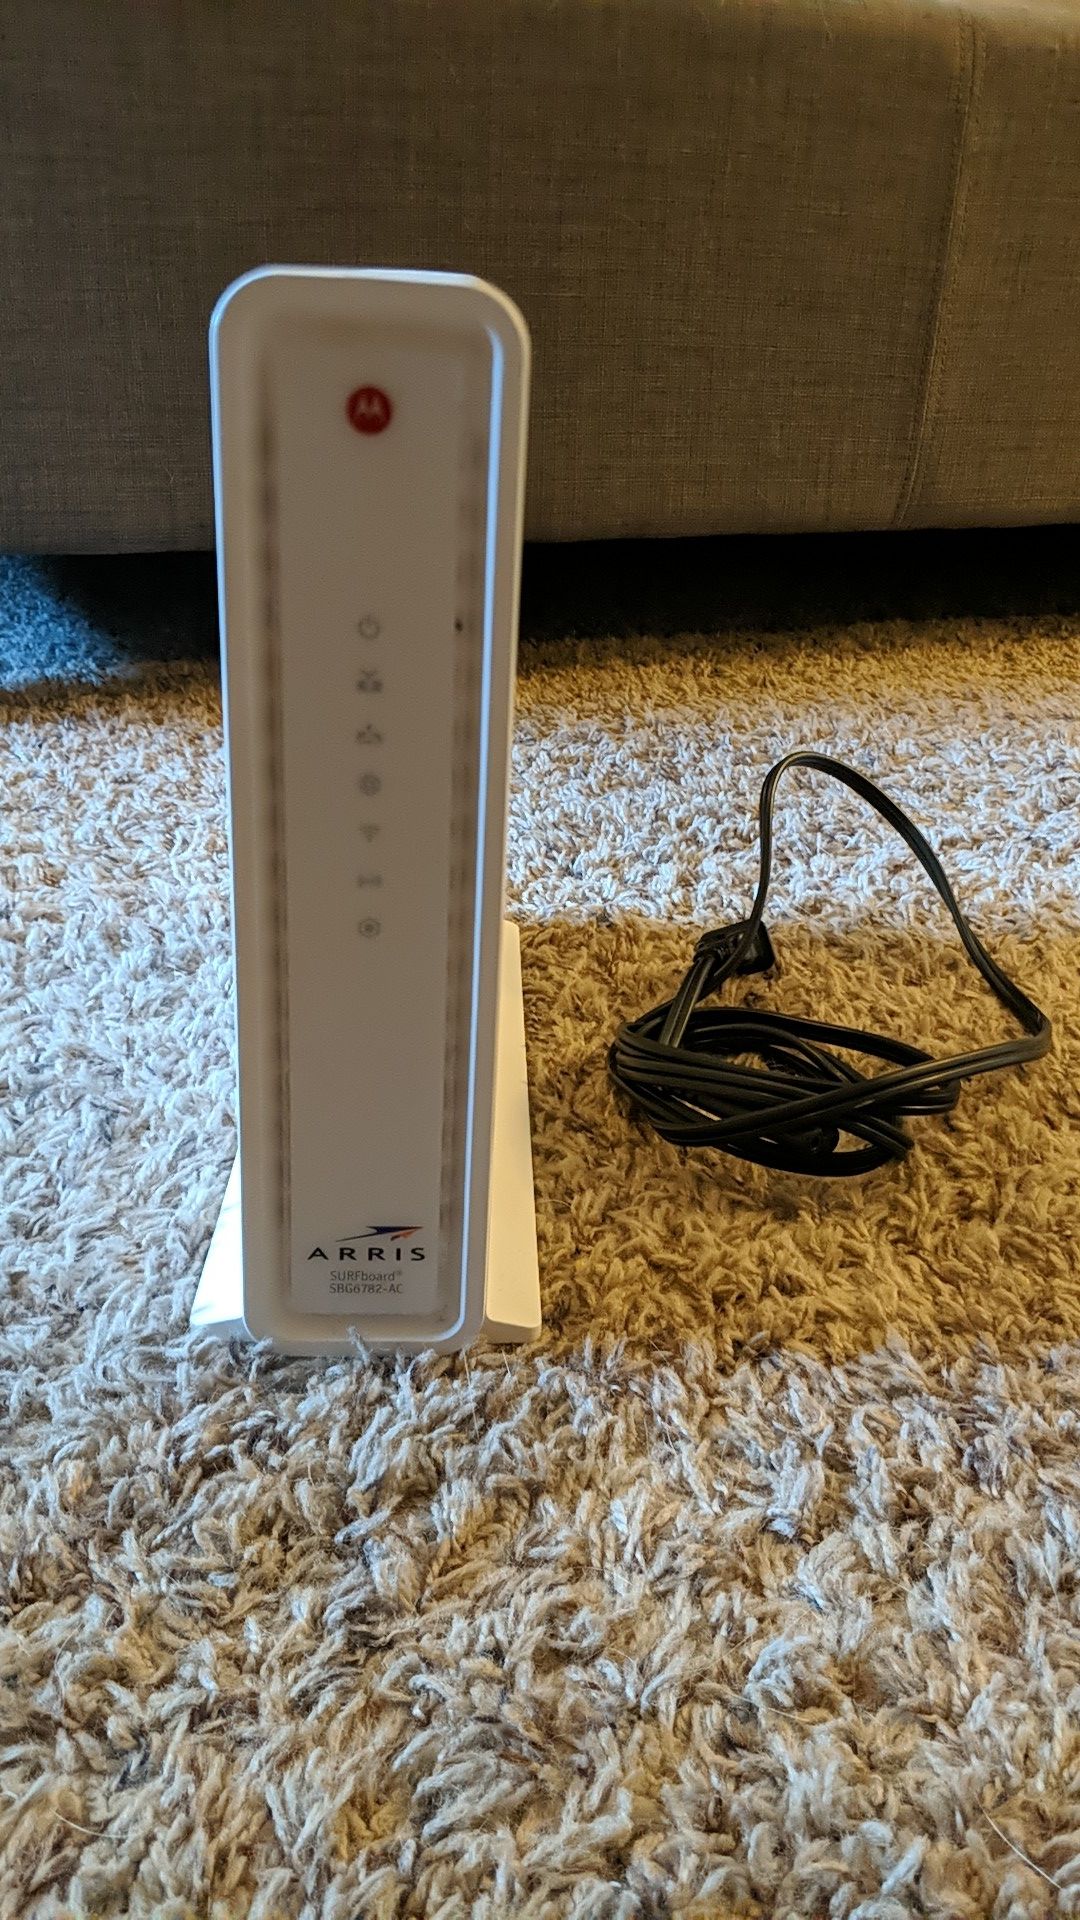 Arris SURFboard SBG6782-AC Cable Modem Router Combo